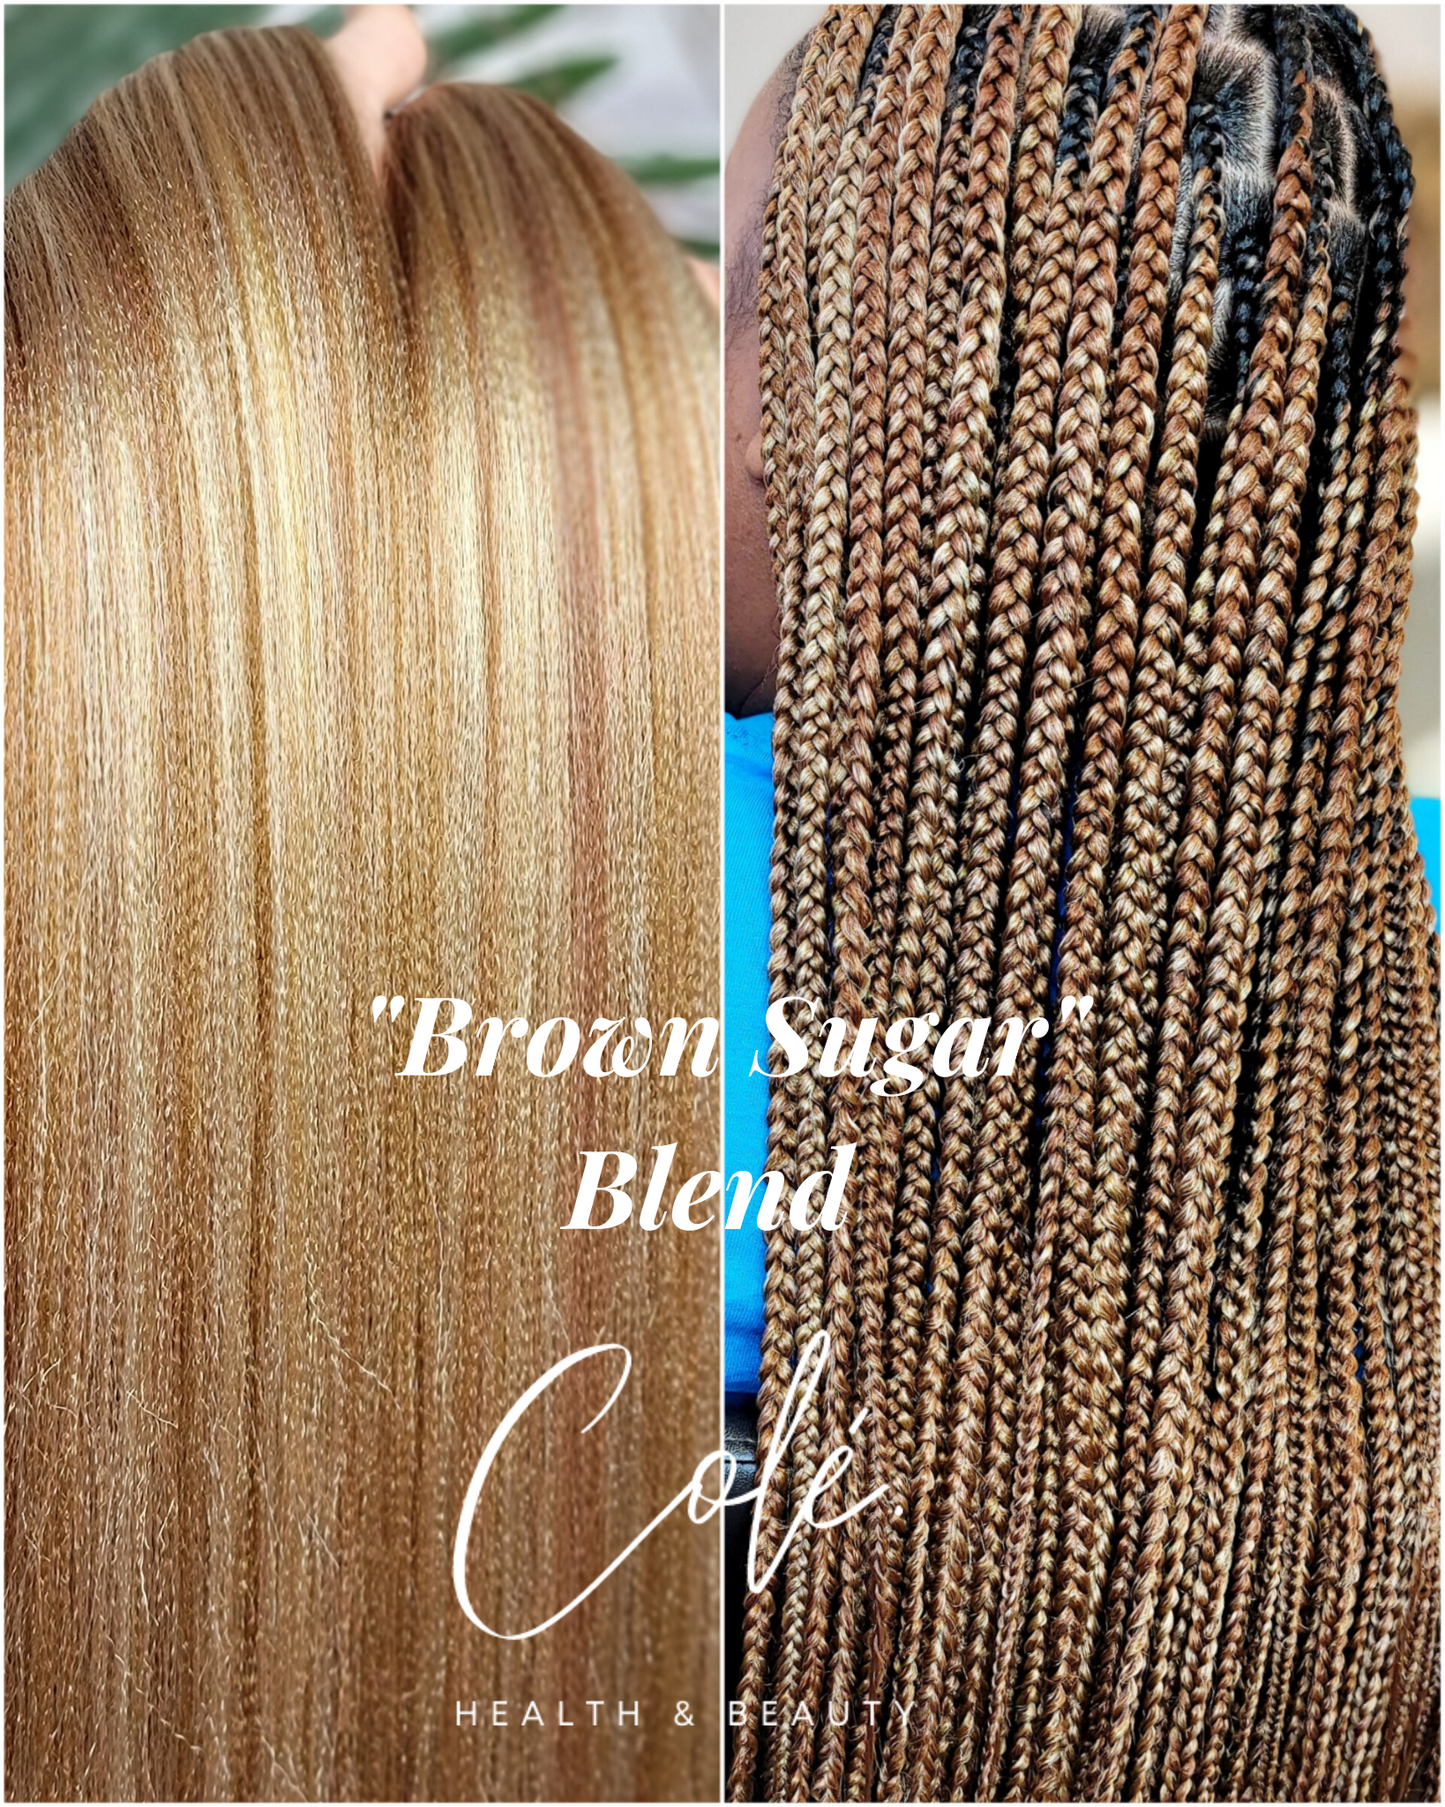 Brown Sugar - Nature Made Collection